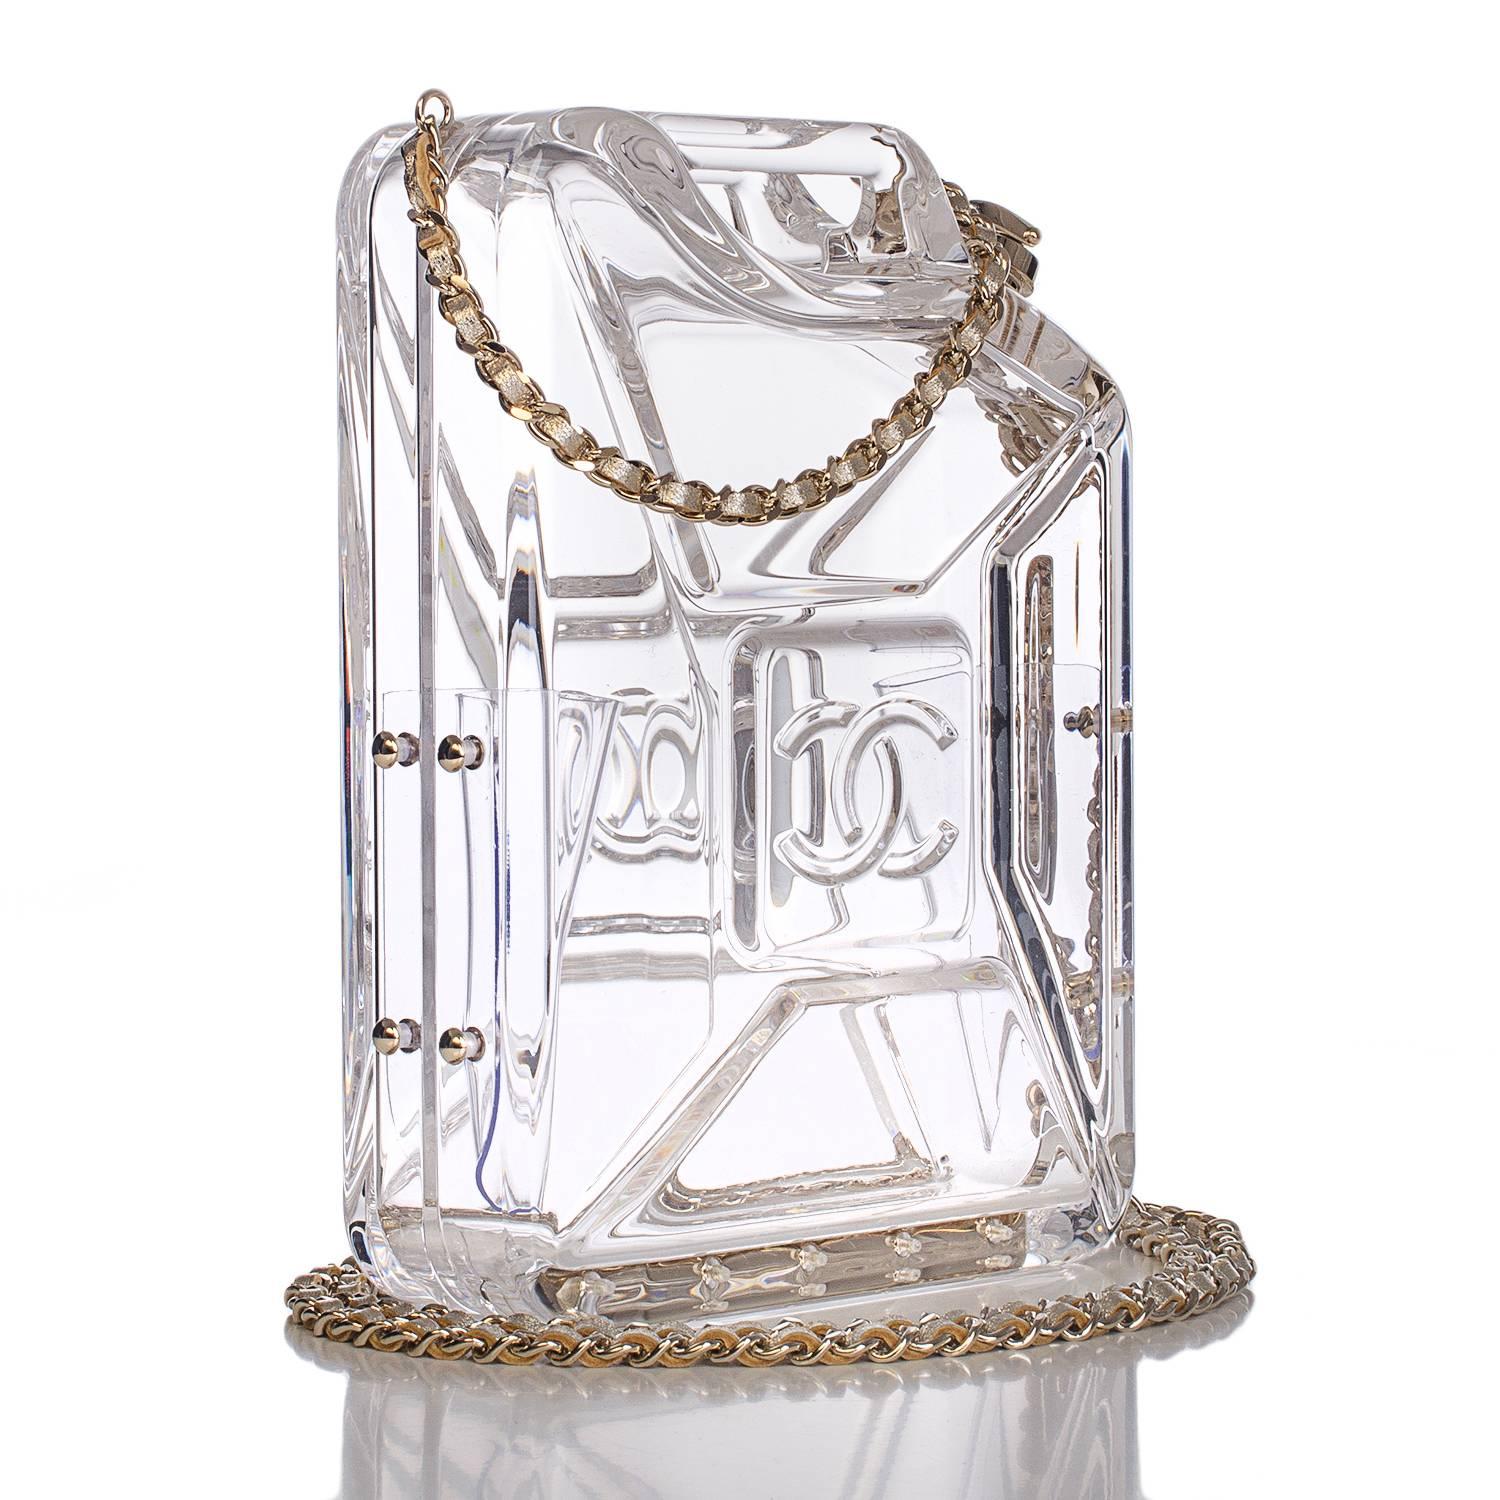 Chanel limited edition Dubai By Night Gas Tank minaudière bag of clear plexiglass with light gold tone metal hardware.

This runway bag is made of clear plexiglass in the style of a 